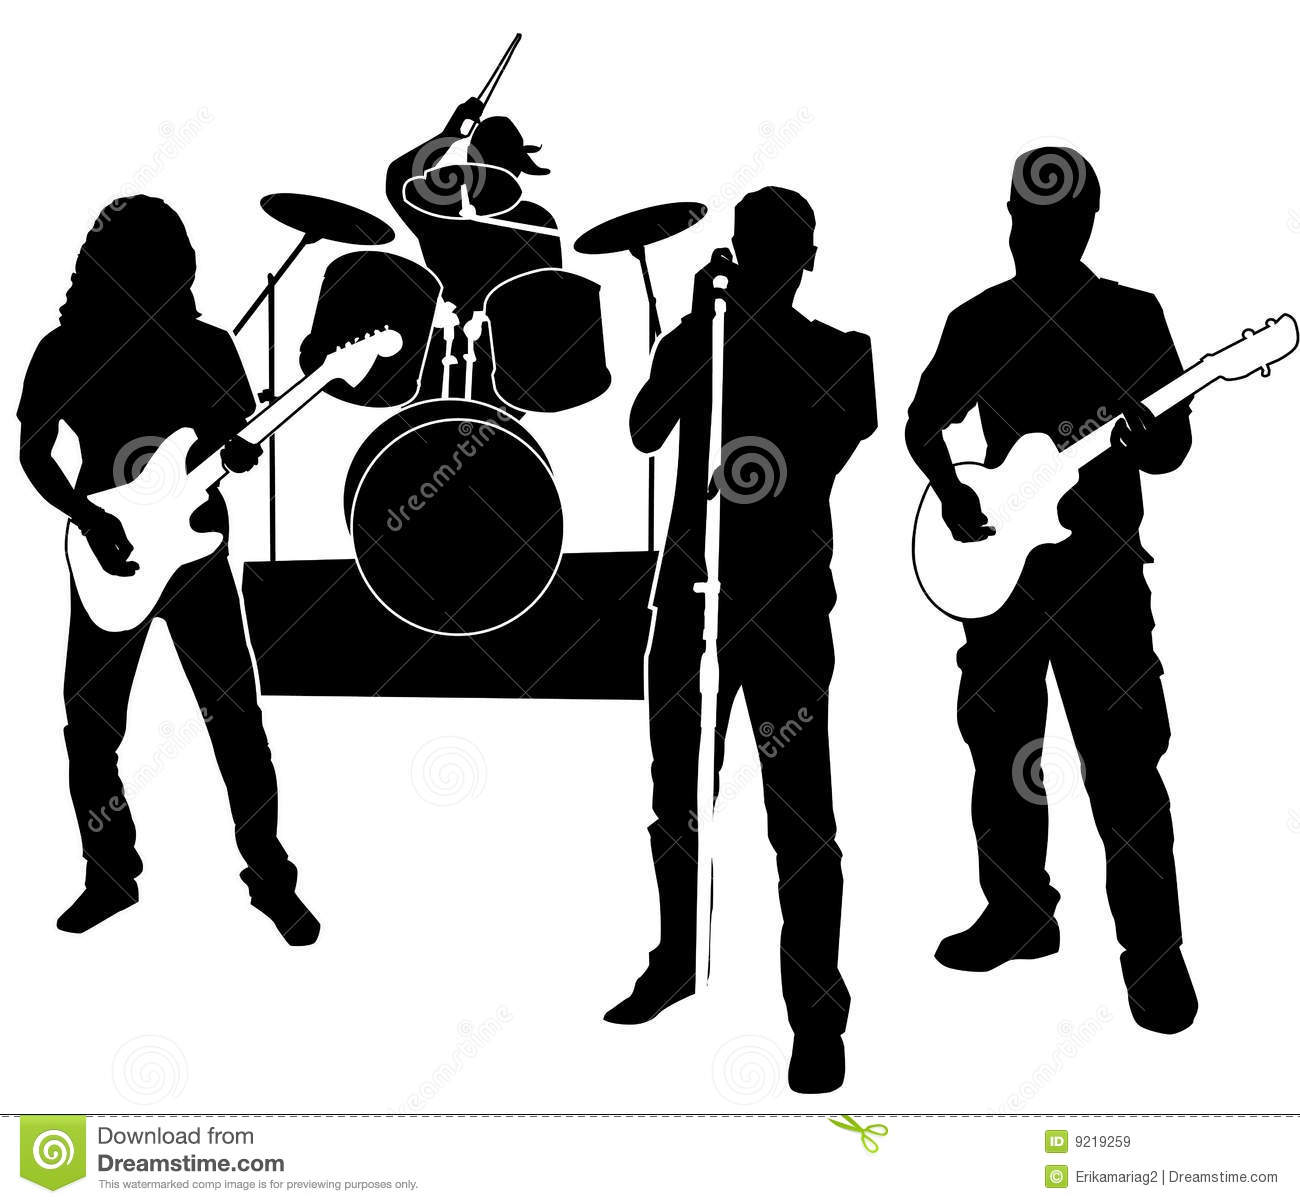 Band clipart: Band Silhouette - Band Clipart